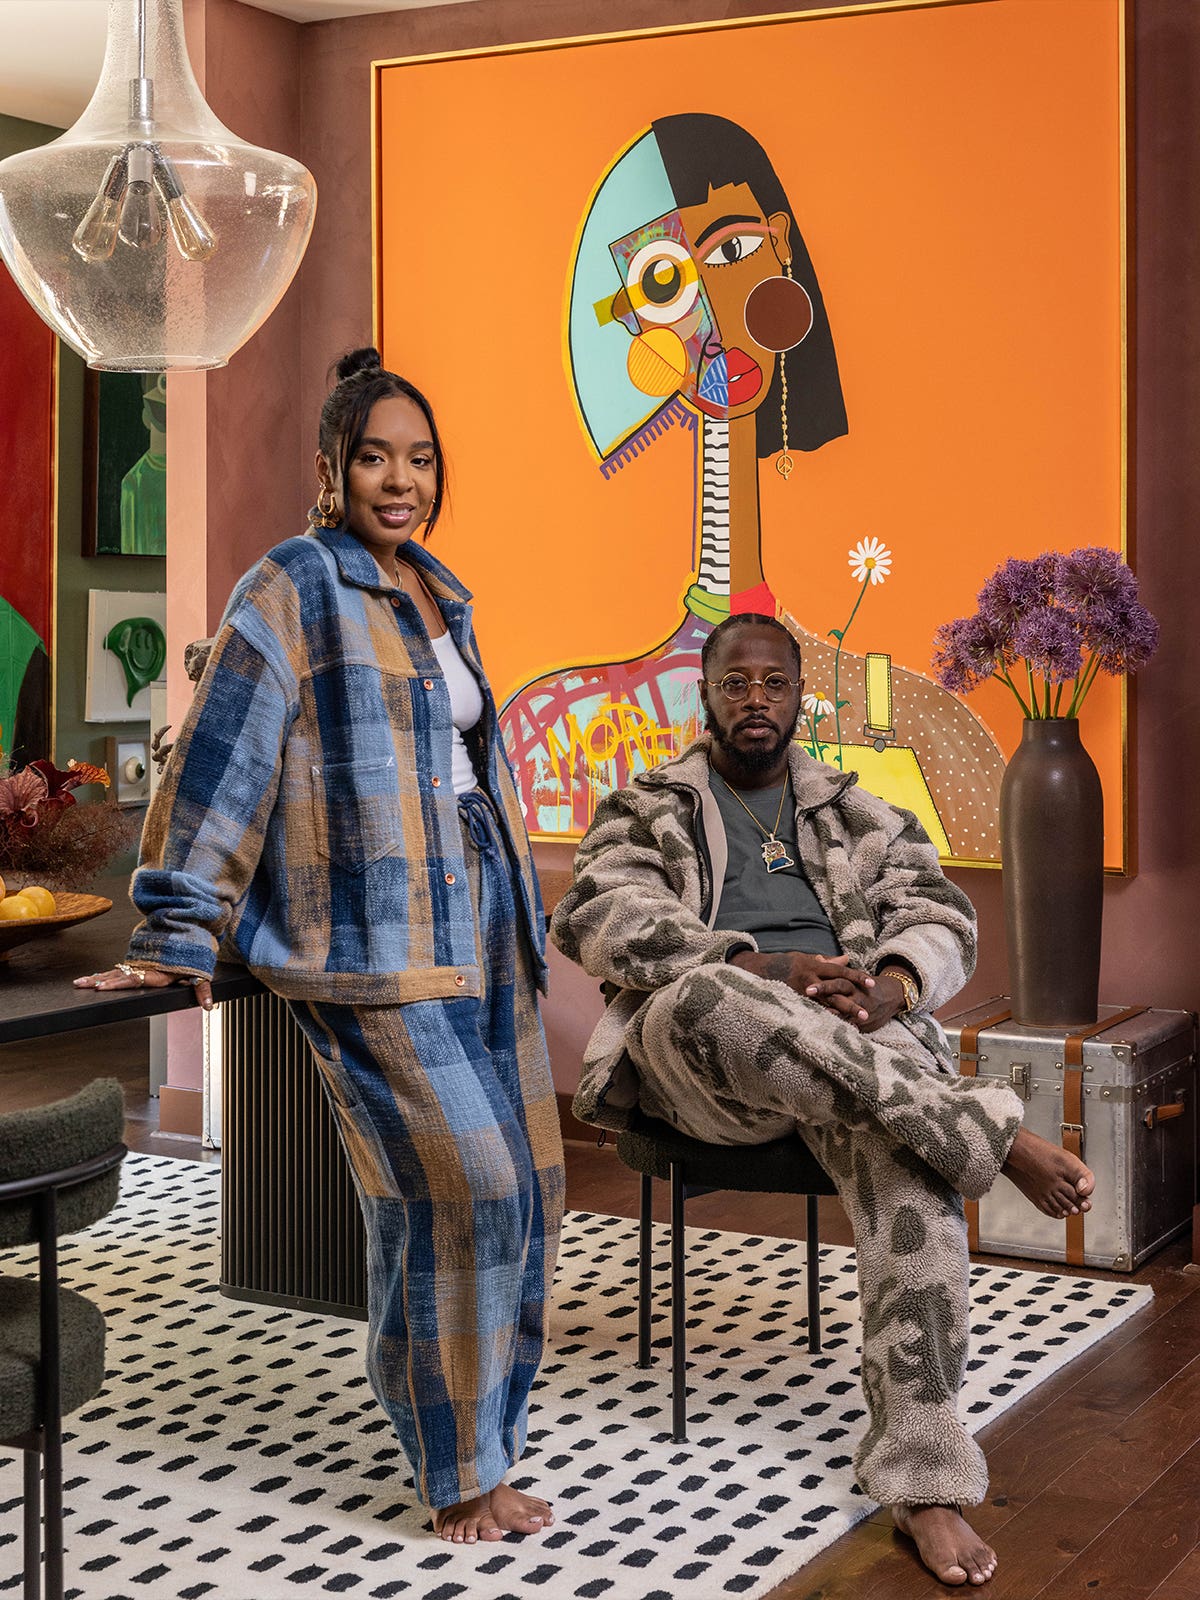 92 Paintings, 112 Sneakers, and a New Baby—This Artist Couple’s Seattle Home Is as Epic as Their Move